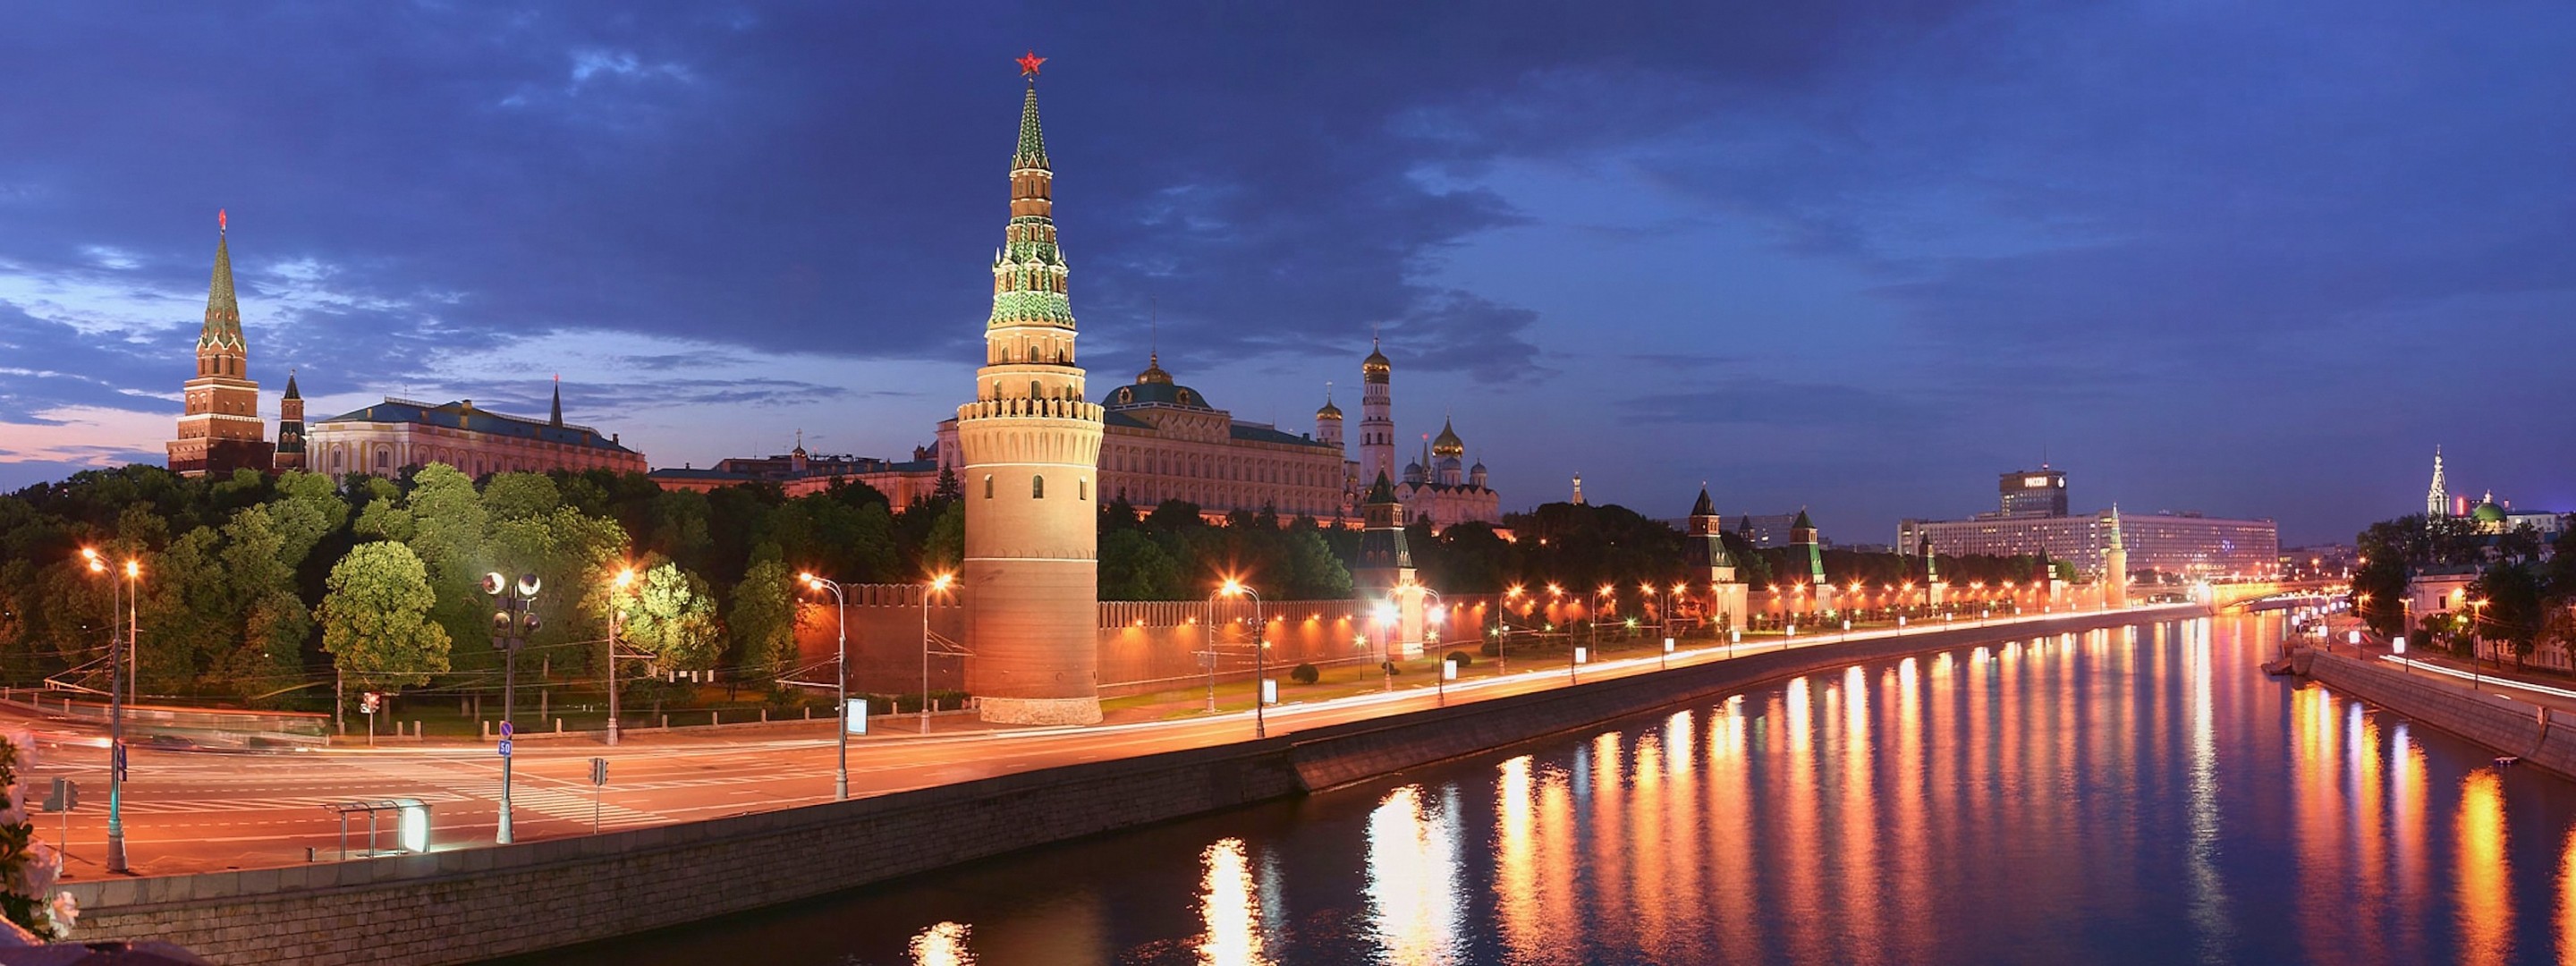 moscow the kremlin river tower